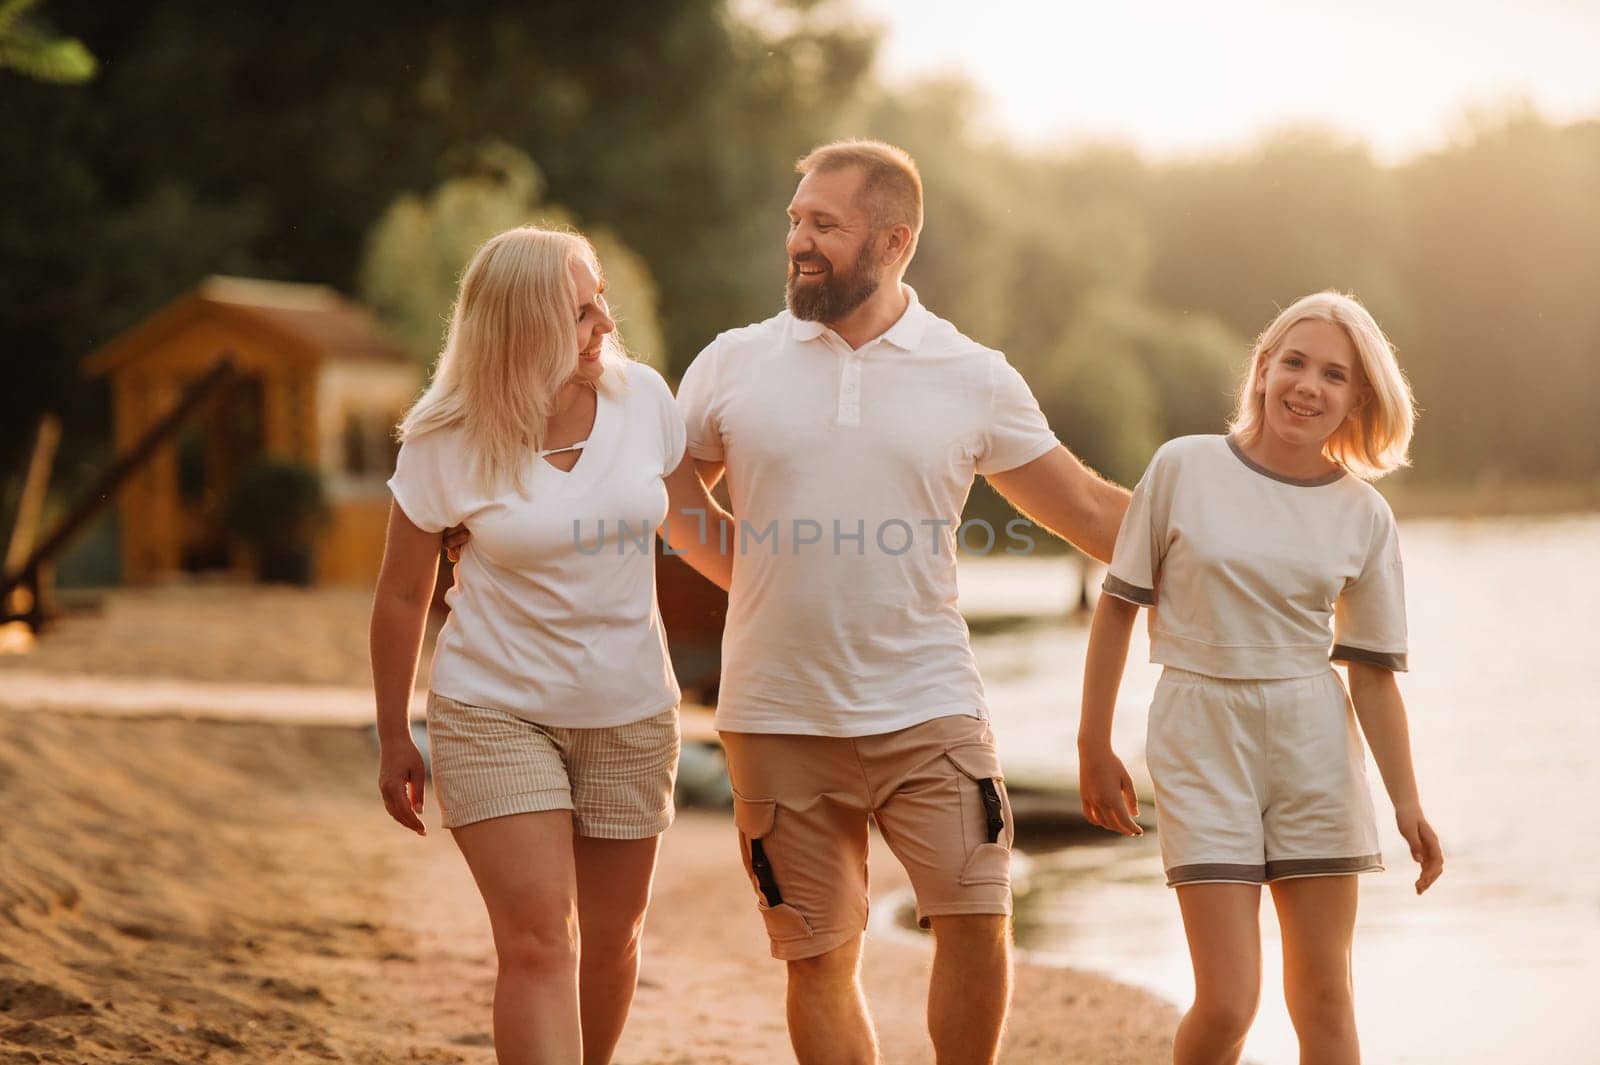 Happy family - father, mother and daughter in light clothes having fun together on the beach in summer.